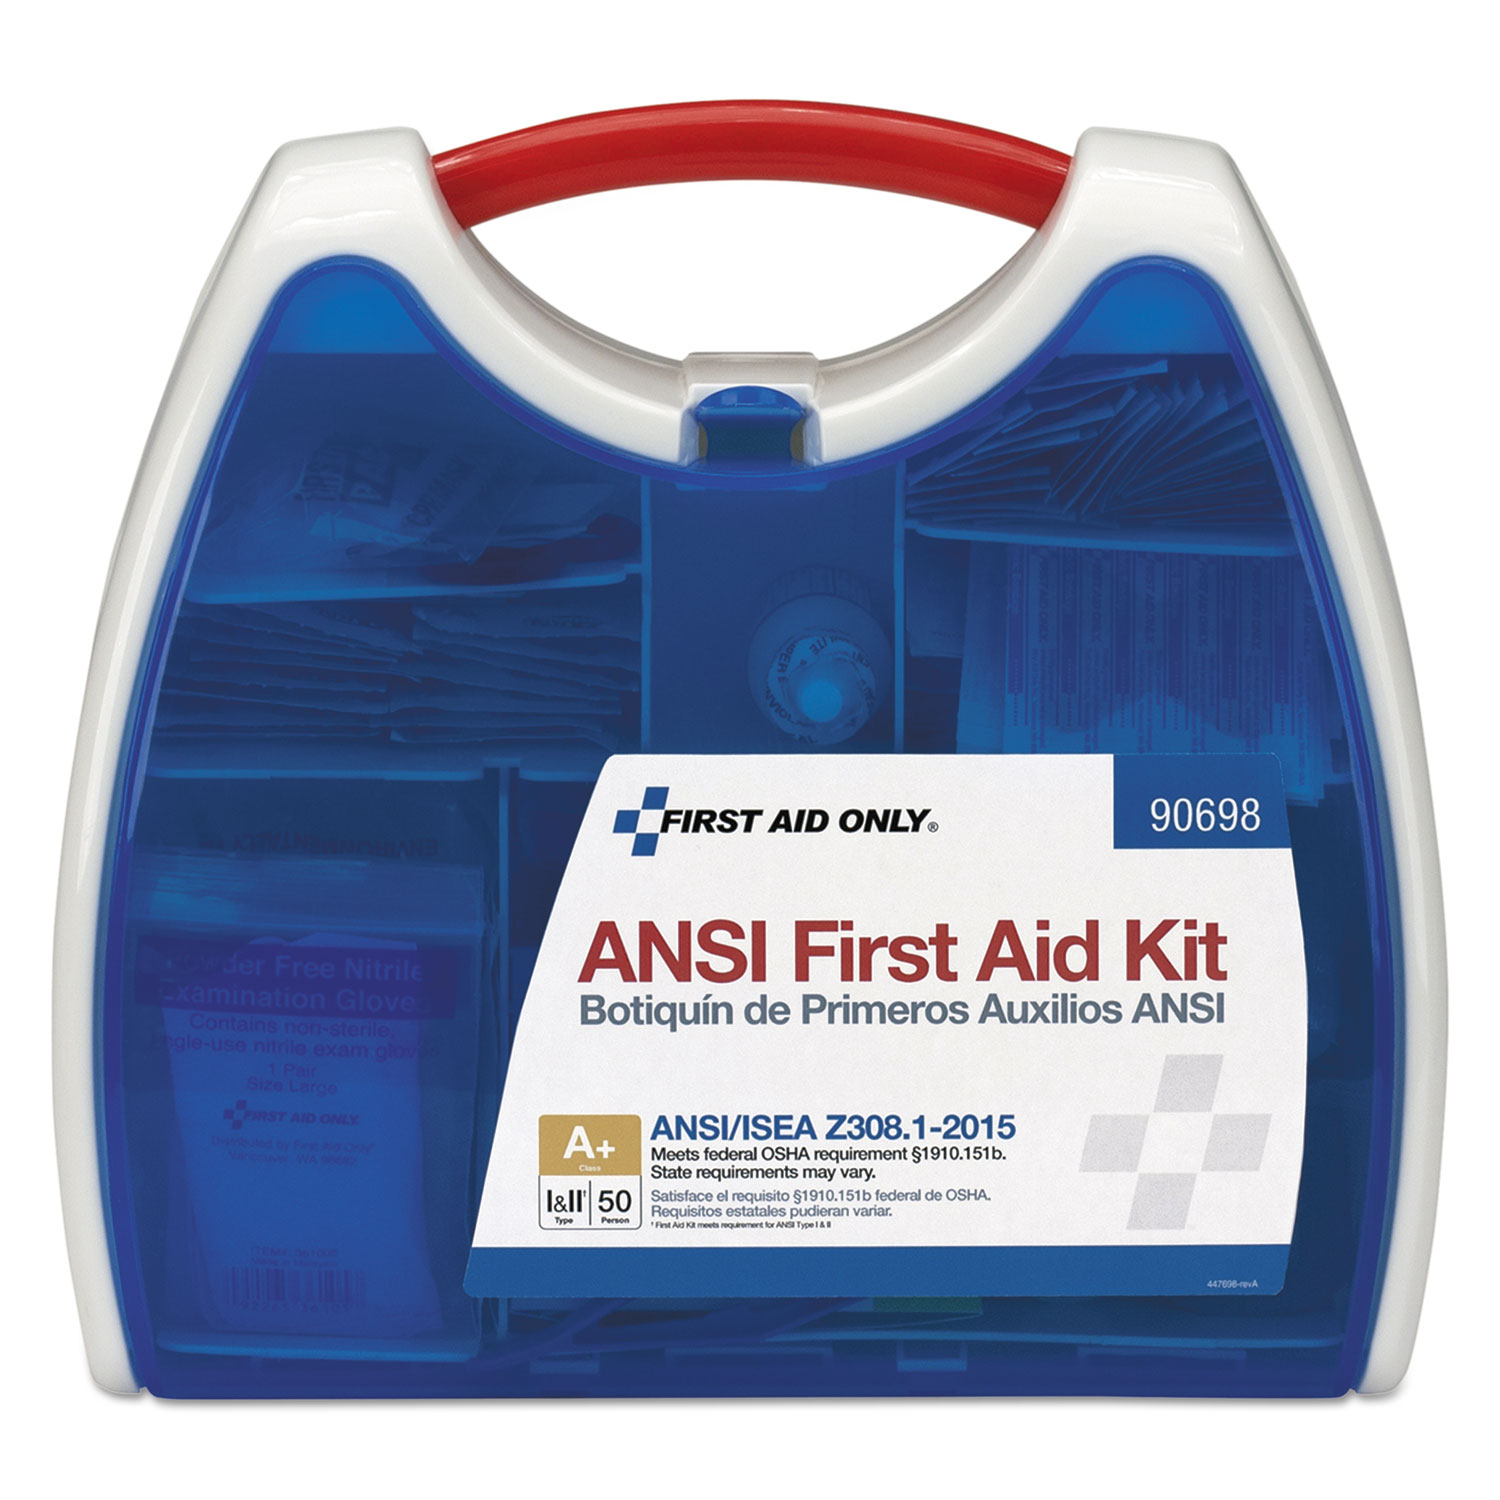 Physicianscare ReadyCare First Aid Kit for up to 50 People 355 Pieces/Kit 90698 - image 3 of 5